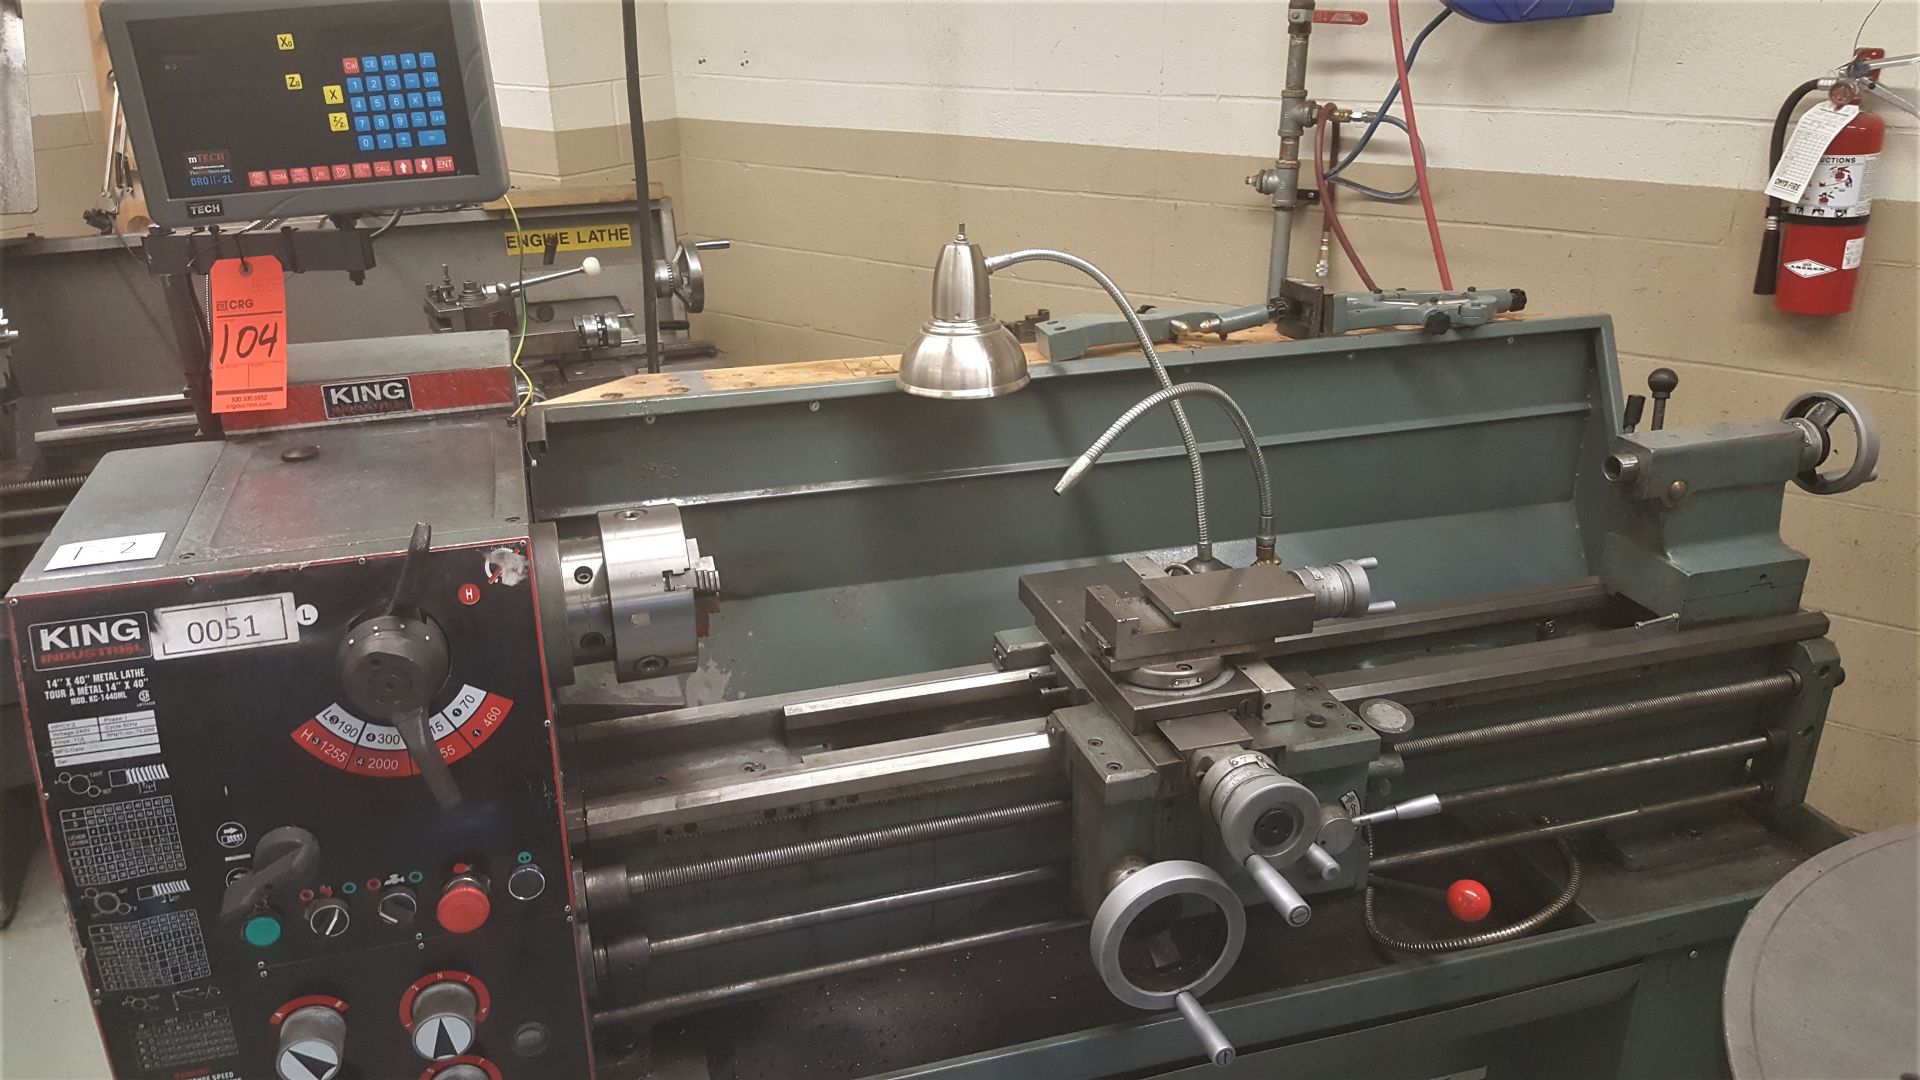 2010 KING 1440 engine lathe, 14" swing X 40" between centers, 70 - 2,00 RPM spindle speeds, inch/ - Image 2 of 6